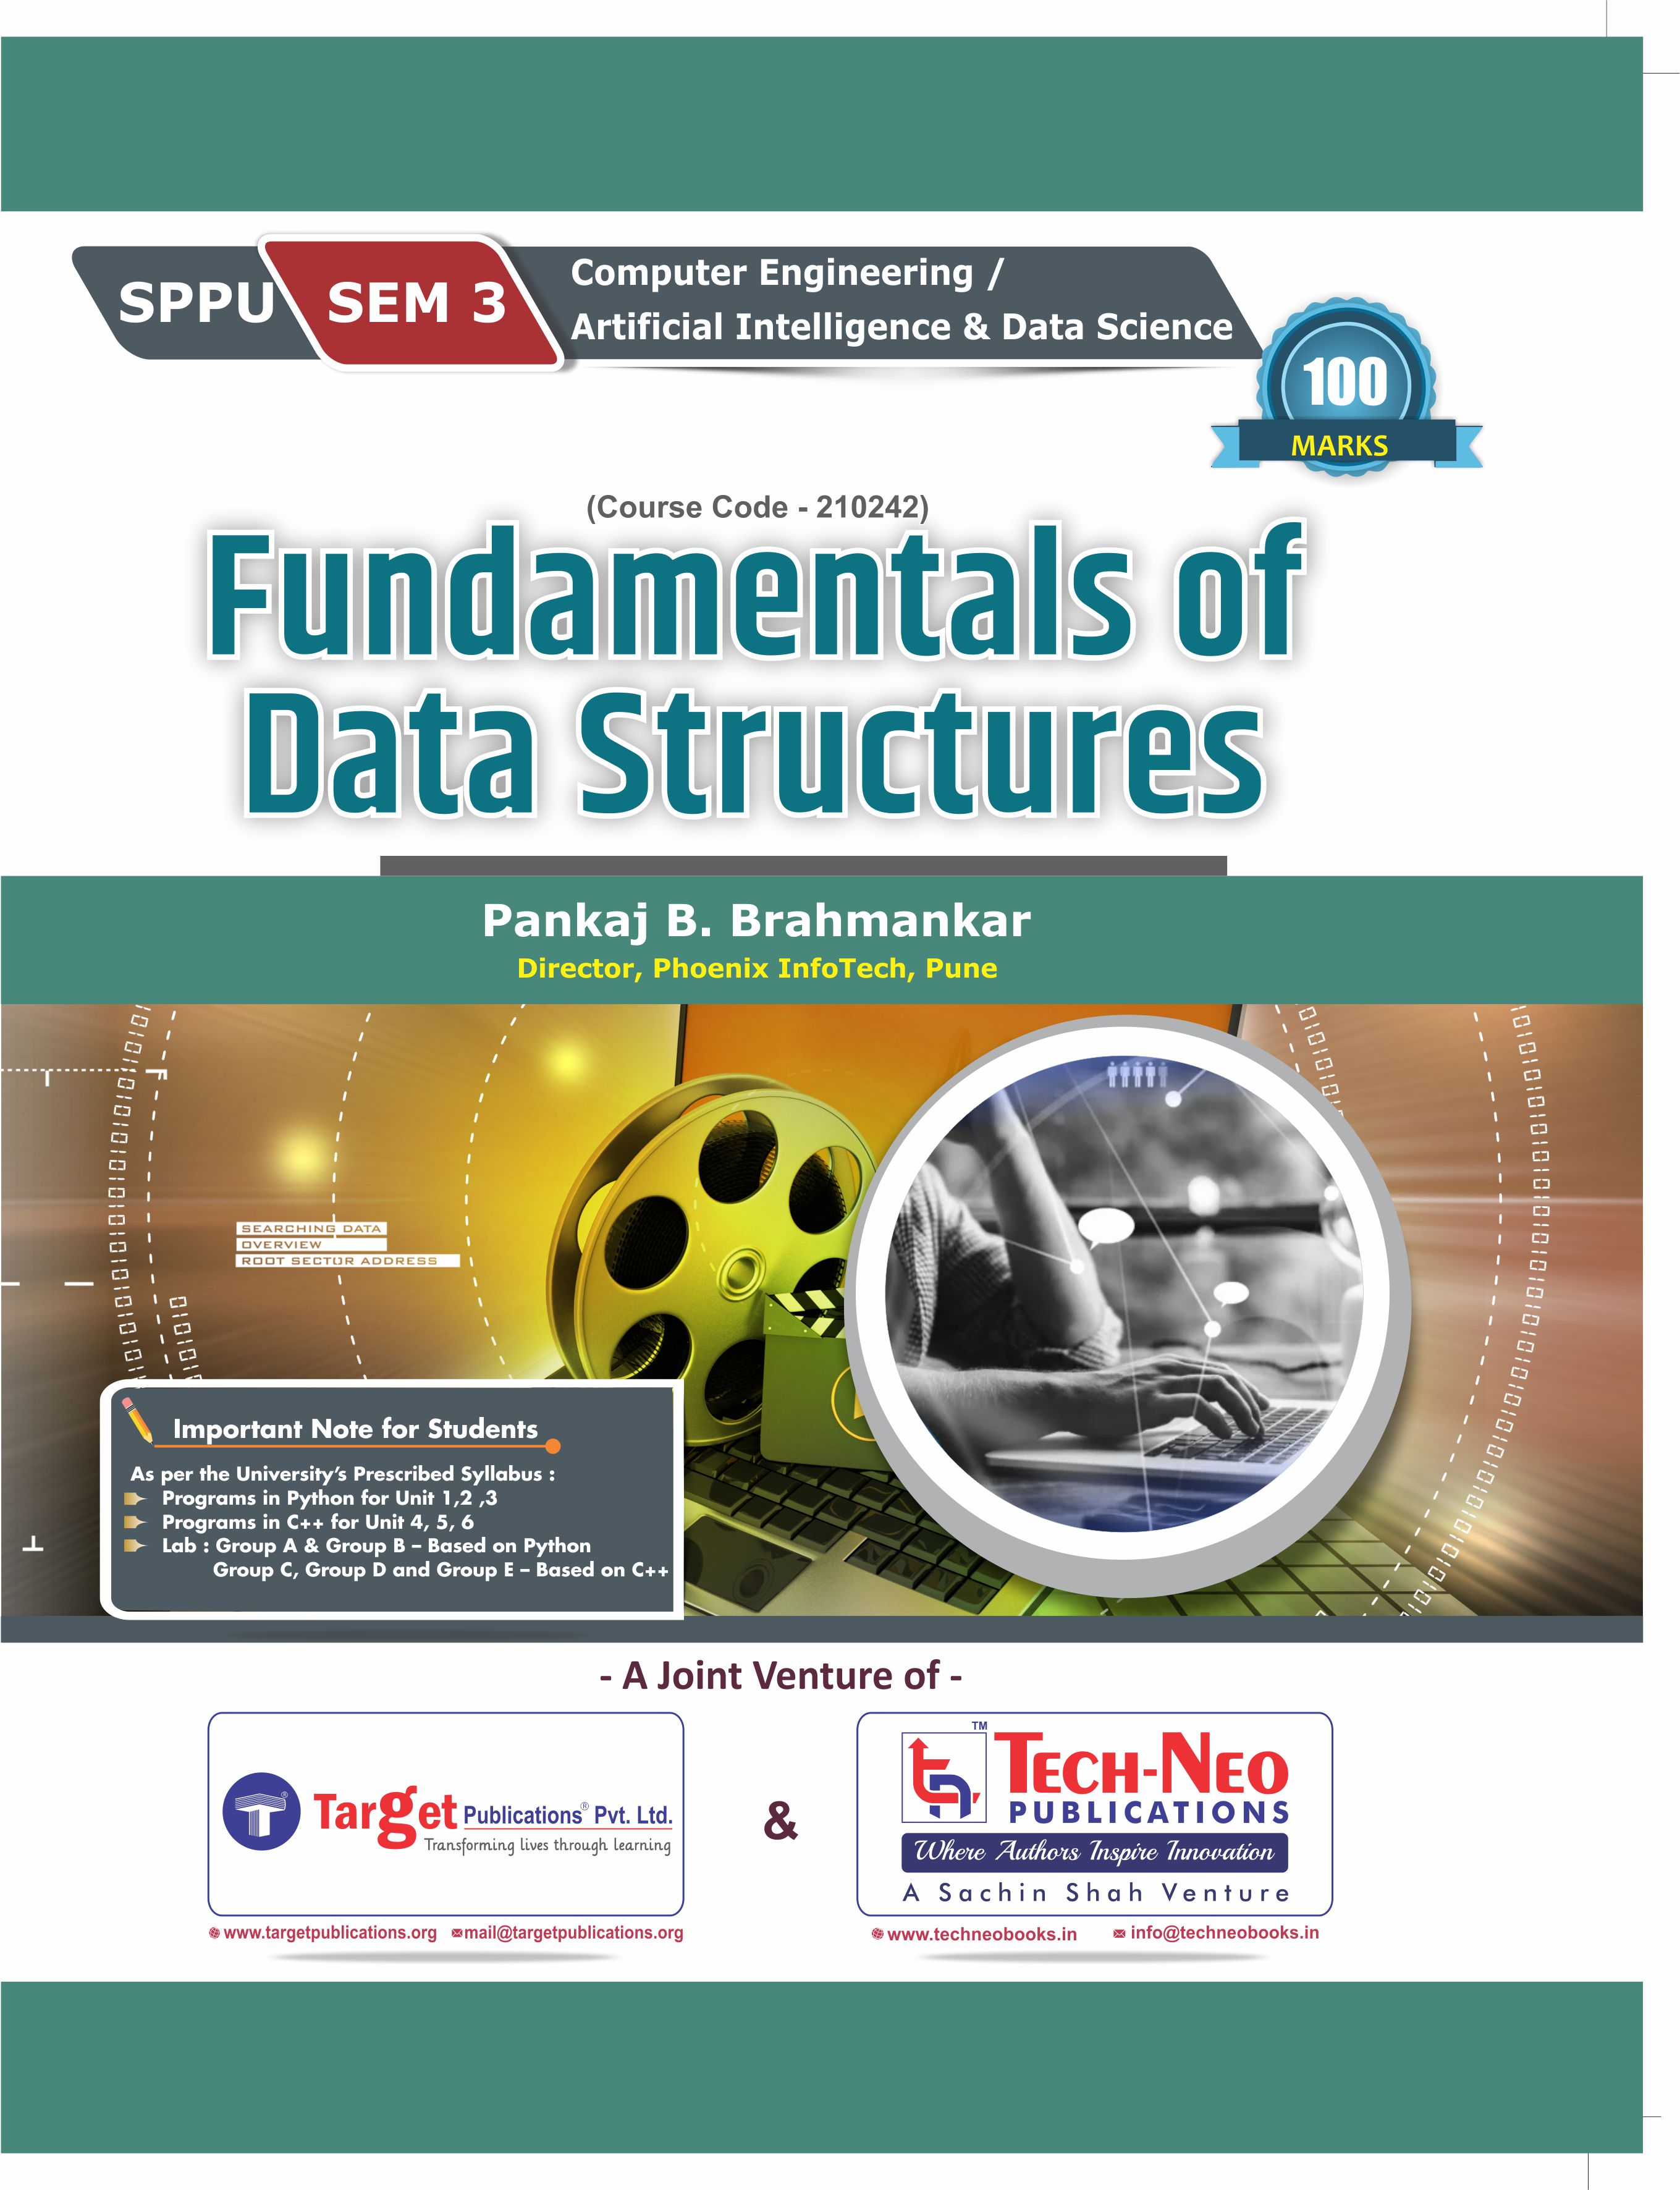 Fundamental of Data Structures